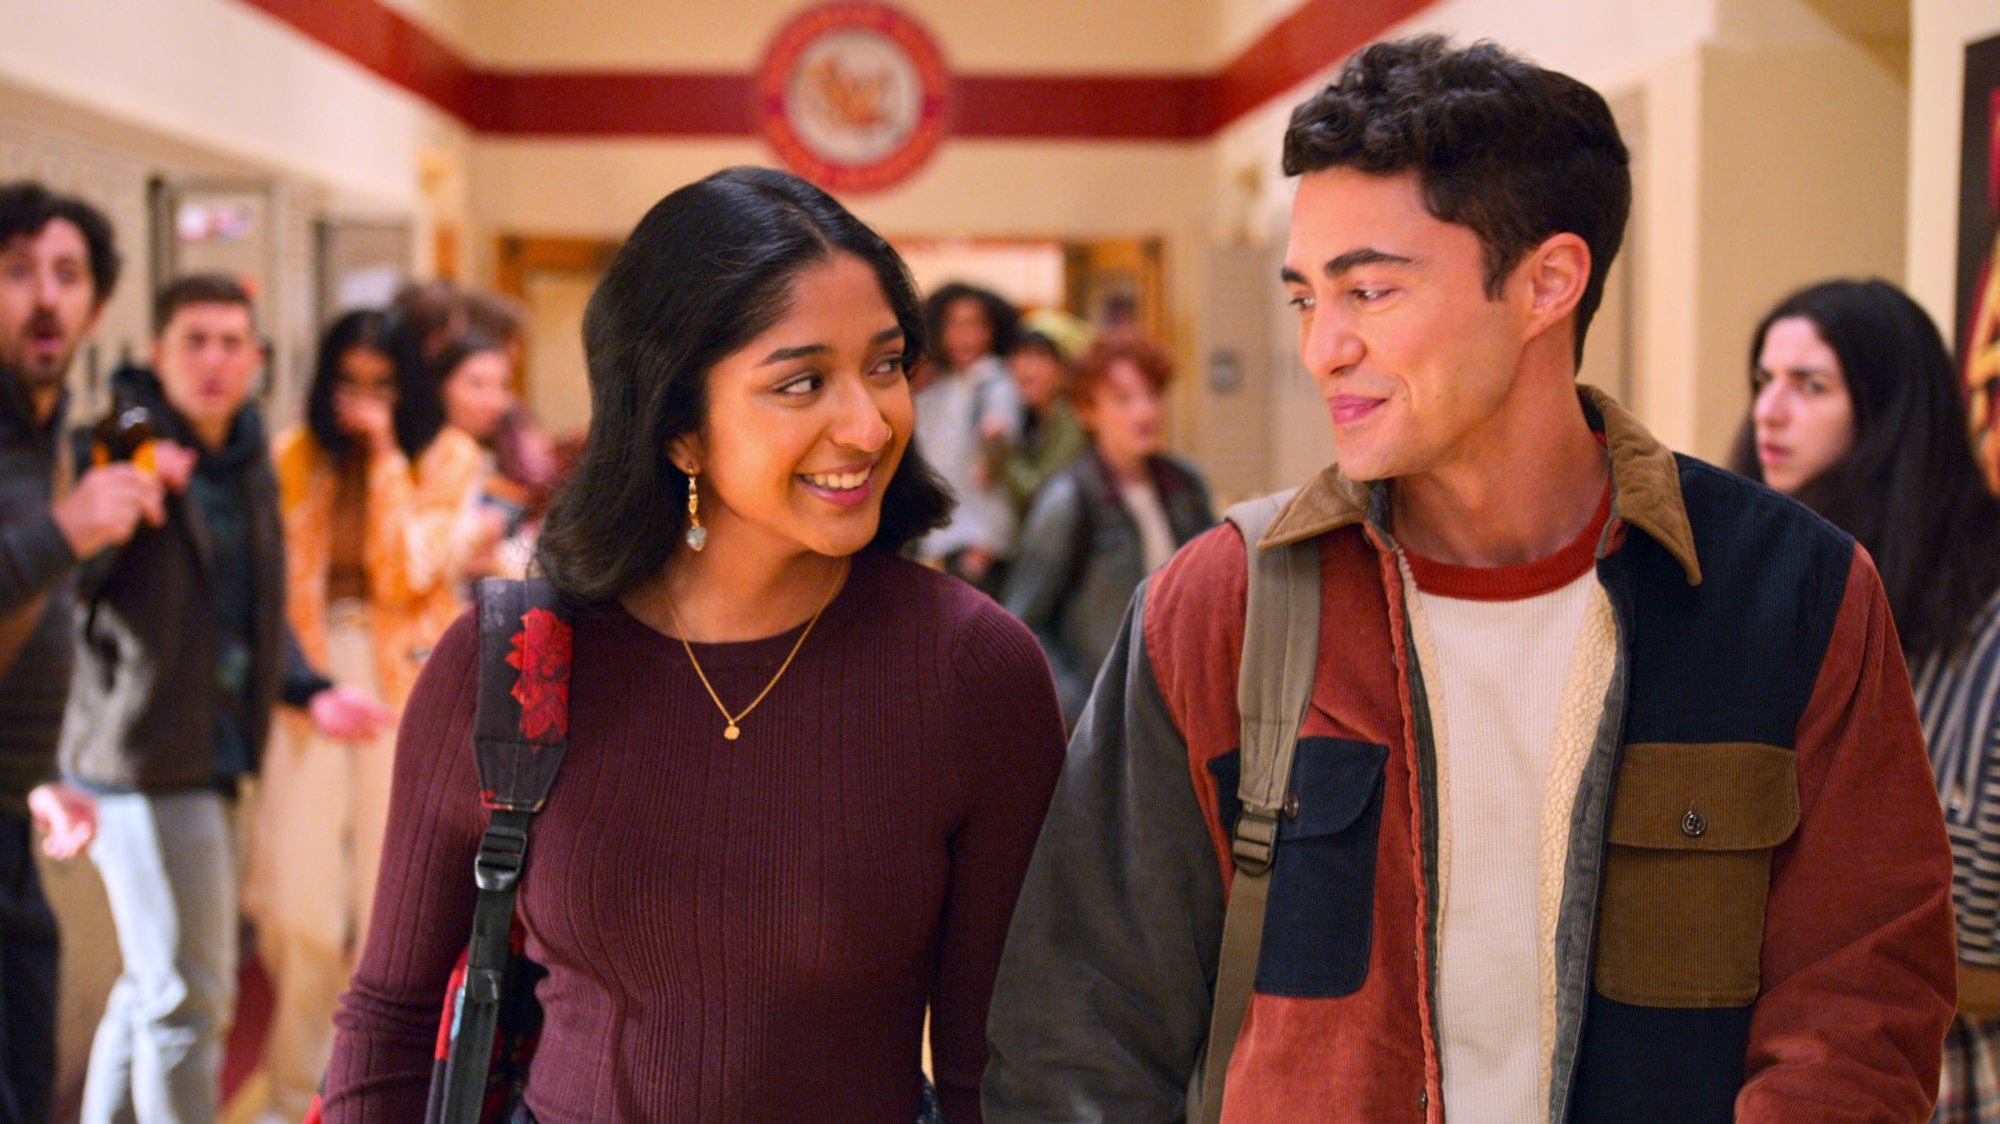 A young man and woman walk through a high school hallway holding hands.